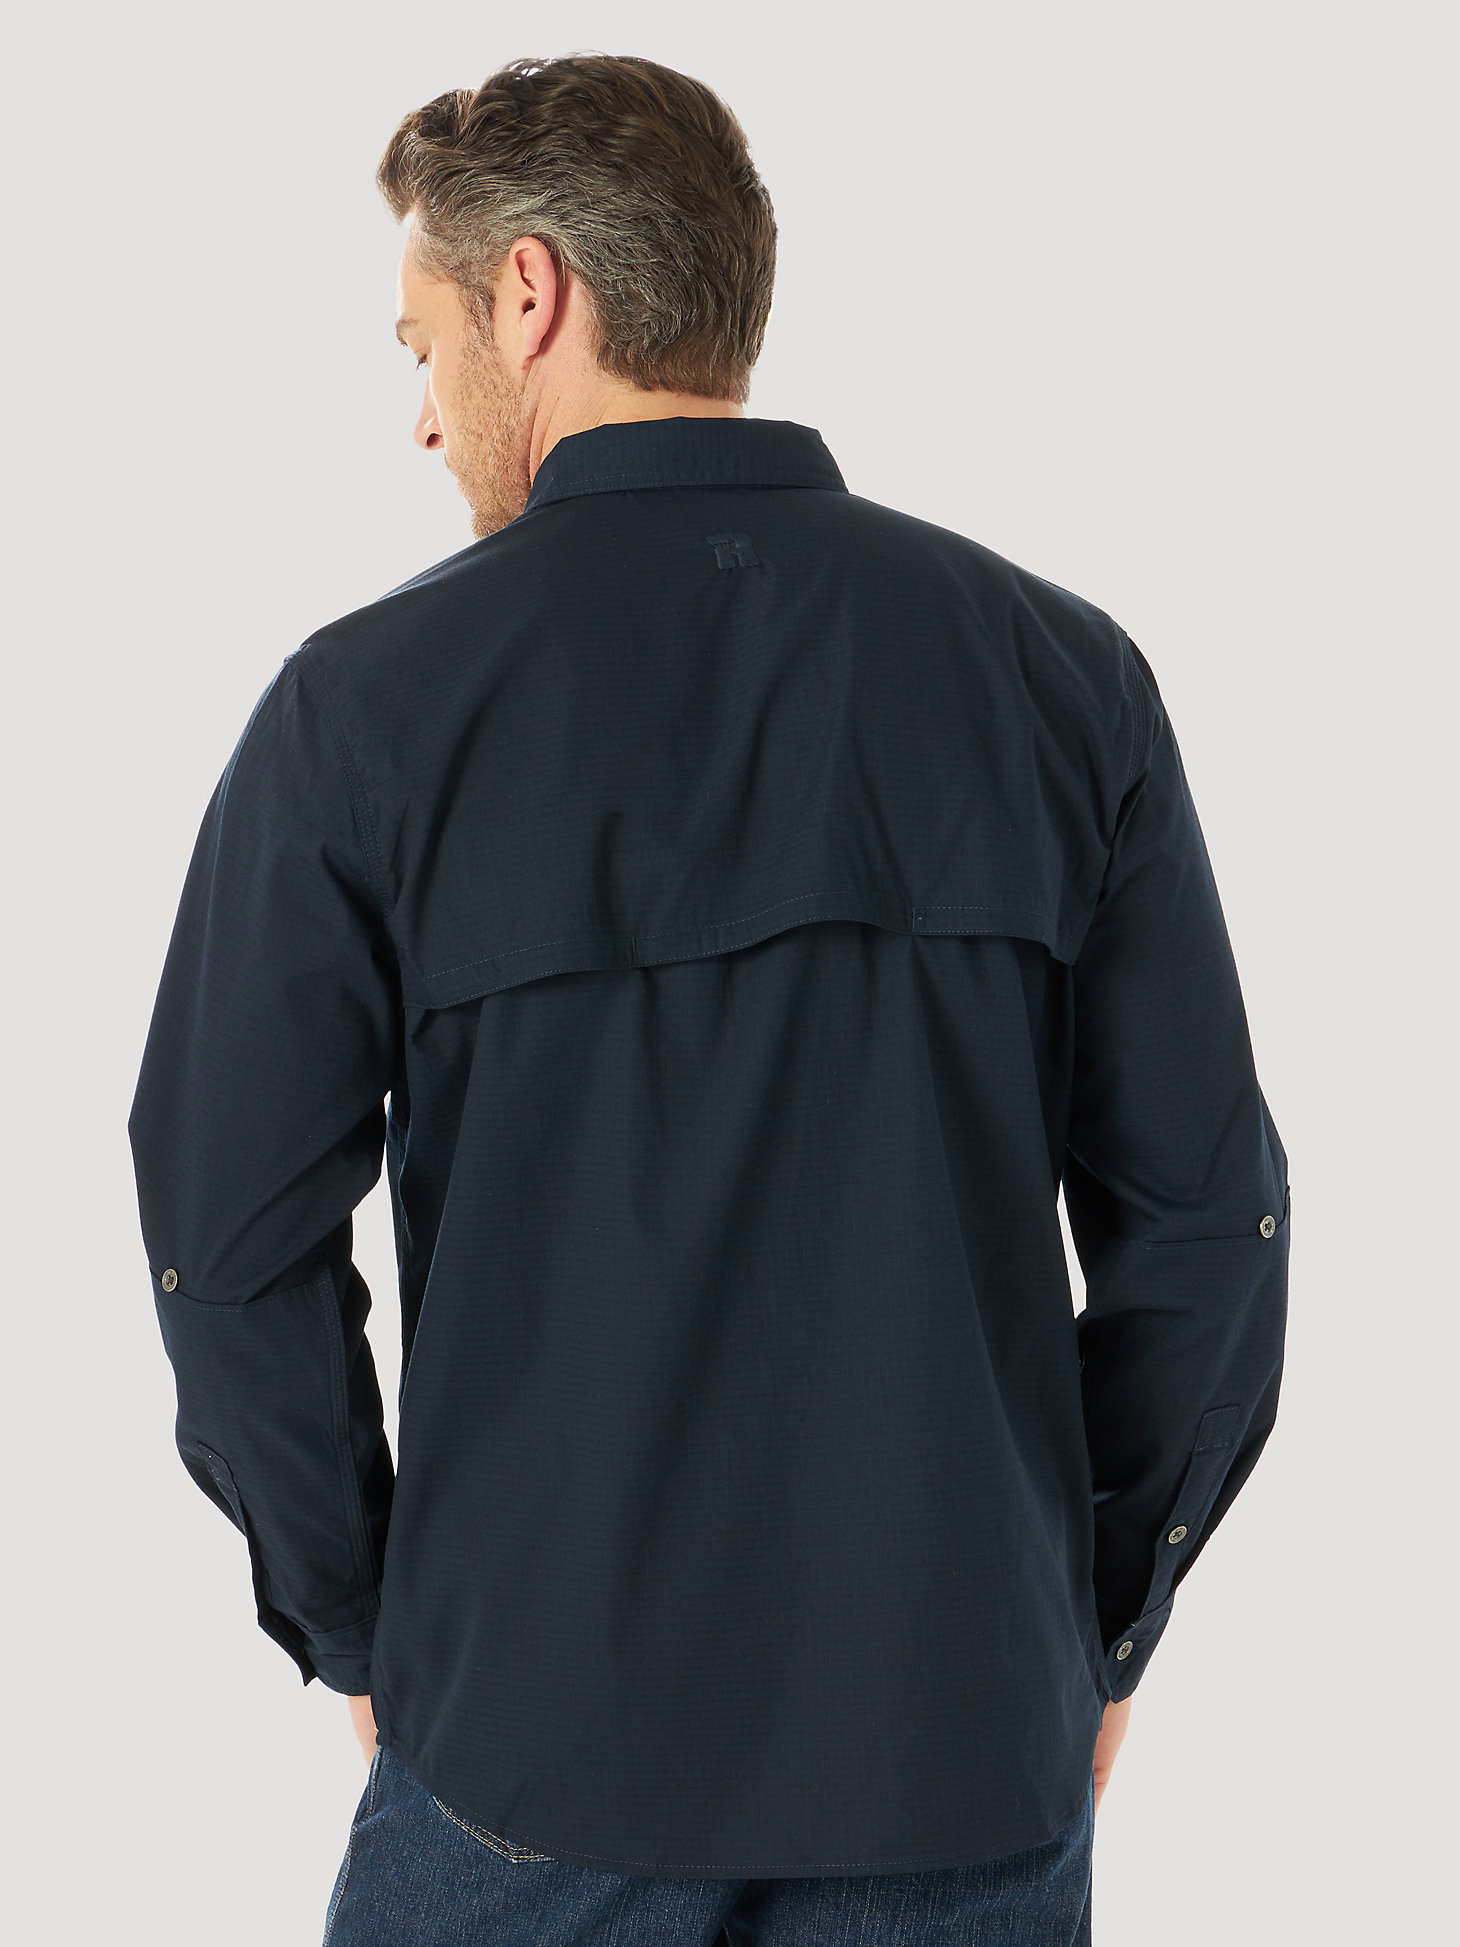 Wrangler® RIGGS Workwear® Long Sleeve Vented Solid Work Shirt in Navy alternative view 1